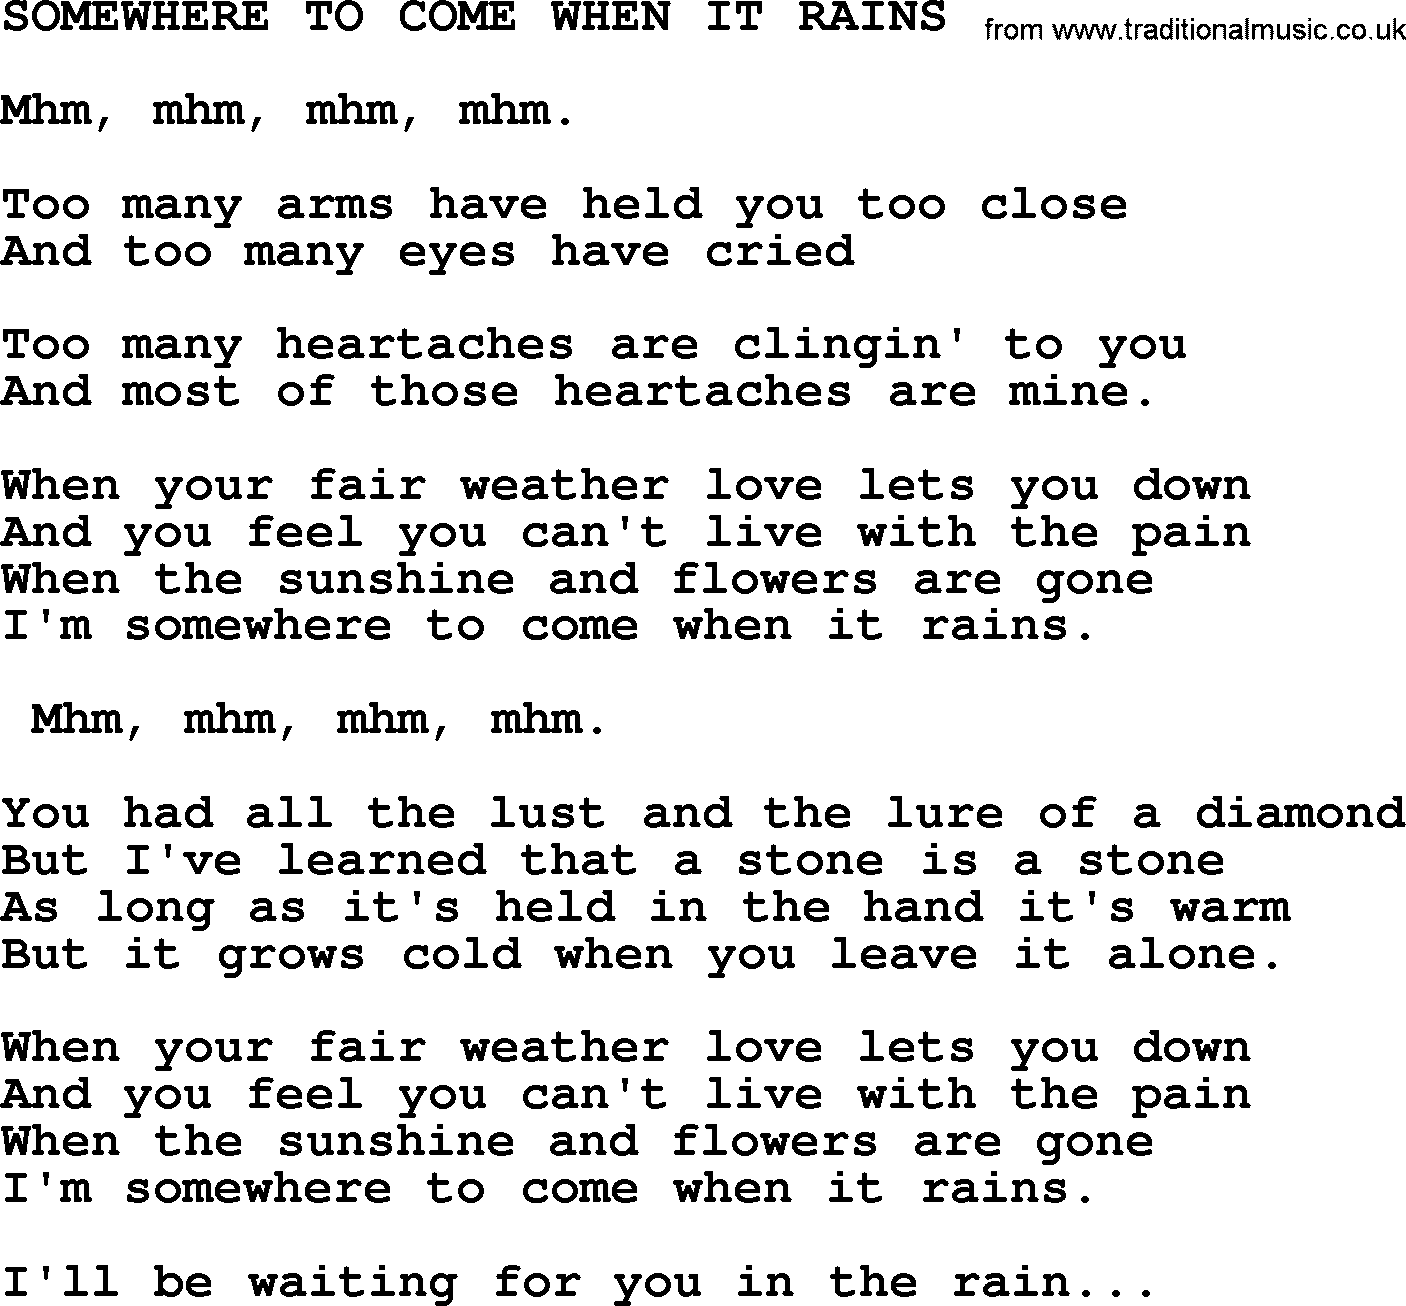 Merle Haggard song: Somewhere To Come When It Rains, lyrics.